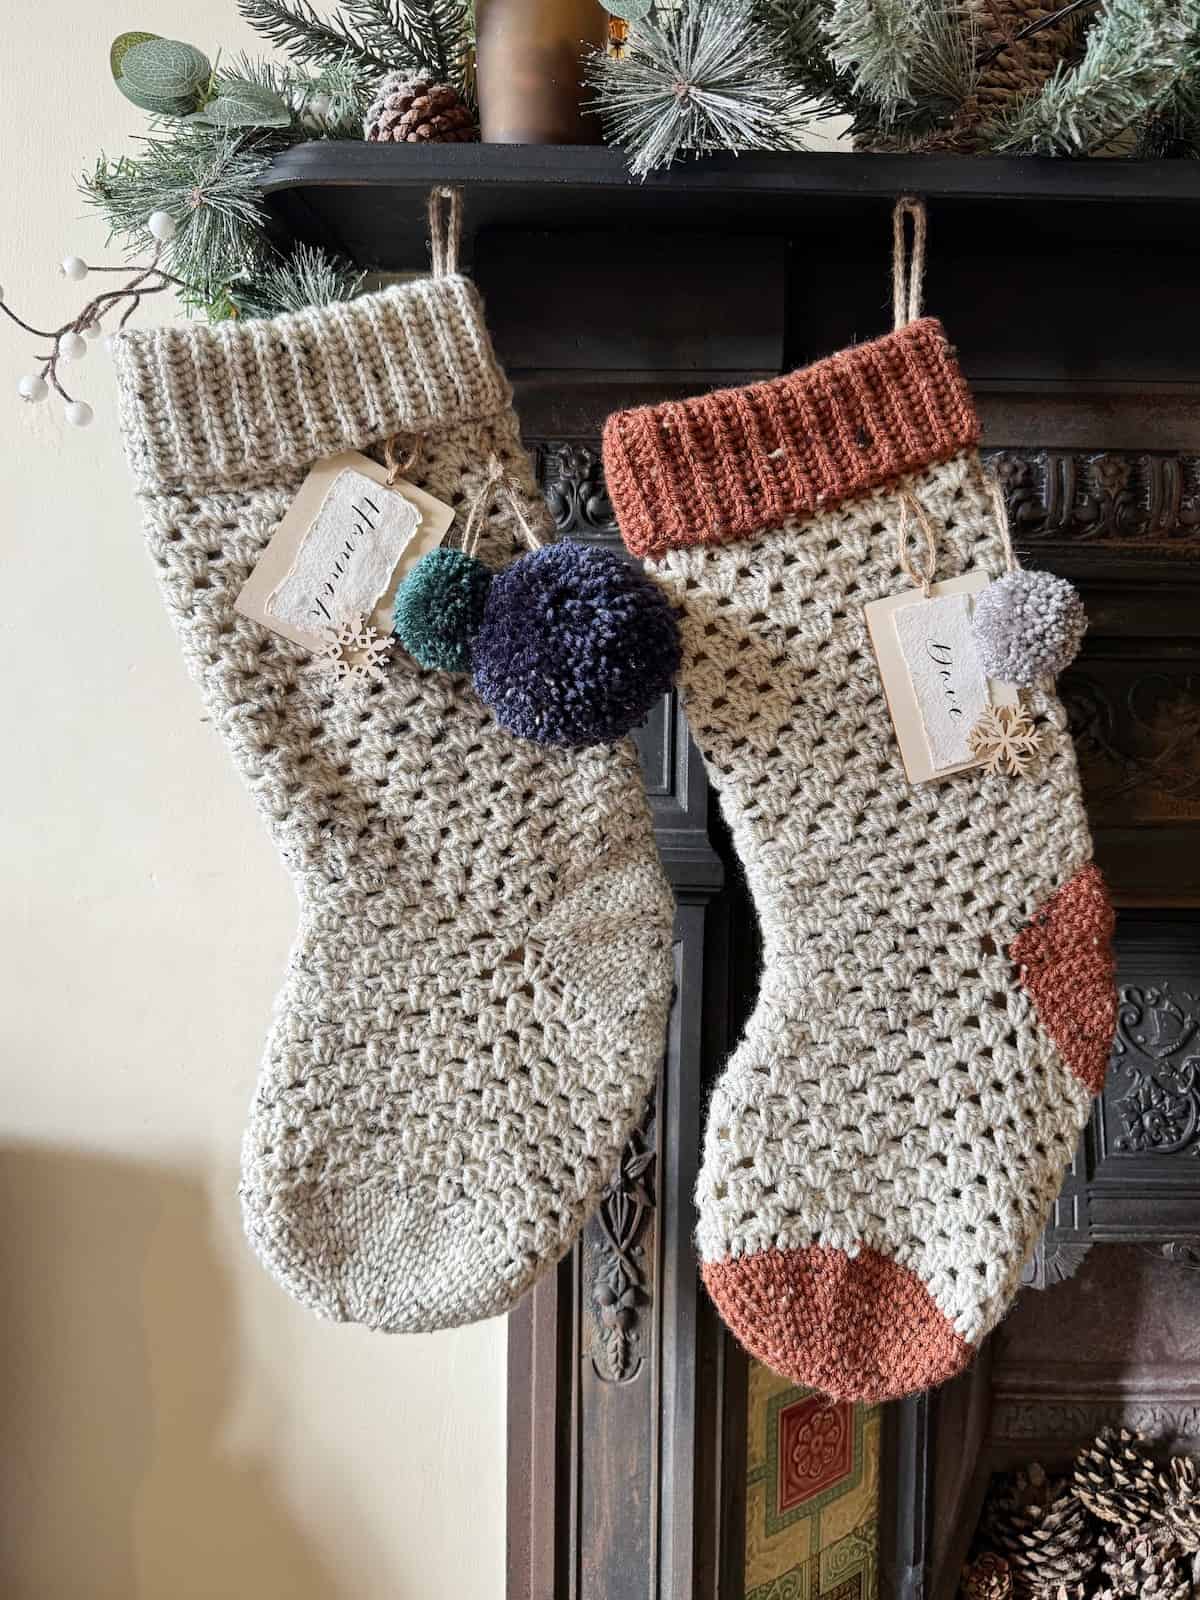 Two crochet christmas stockings using the granny stitch hanging on a fireplace.